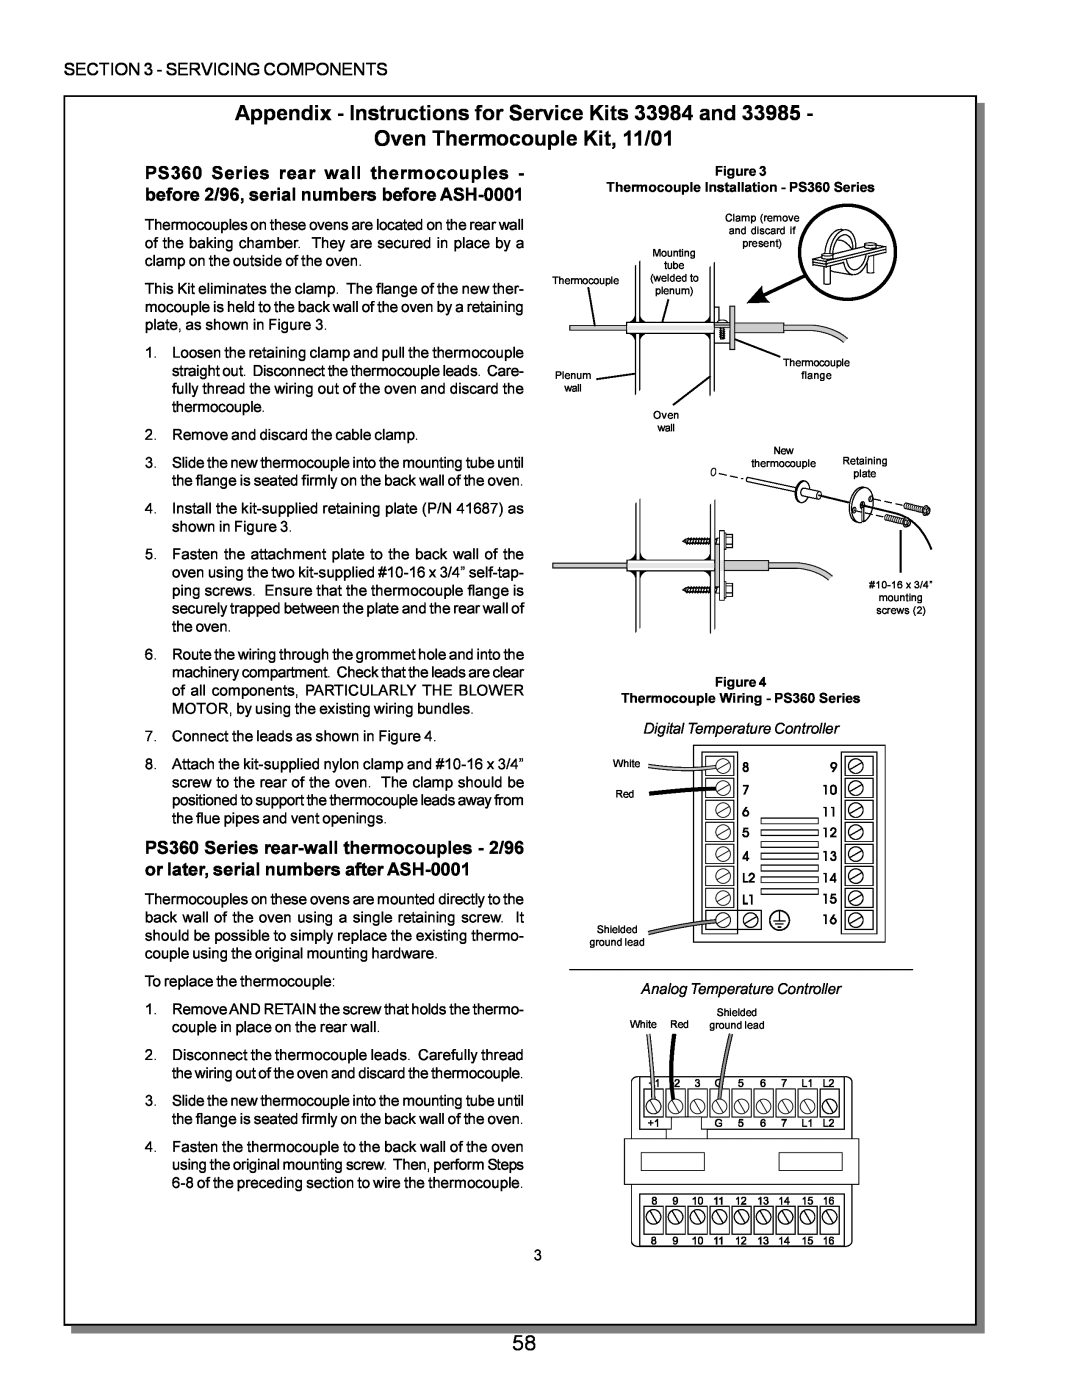 Middleby Marshall PS224 PS310 manual Appendix - Instructions for Service Kits 33984 and, Oven Thermocouple Kit, 11/01, wall 